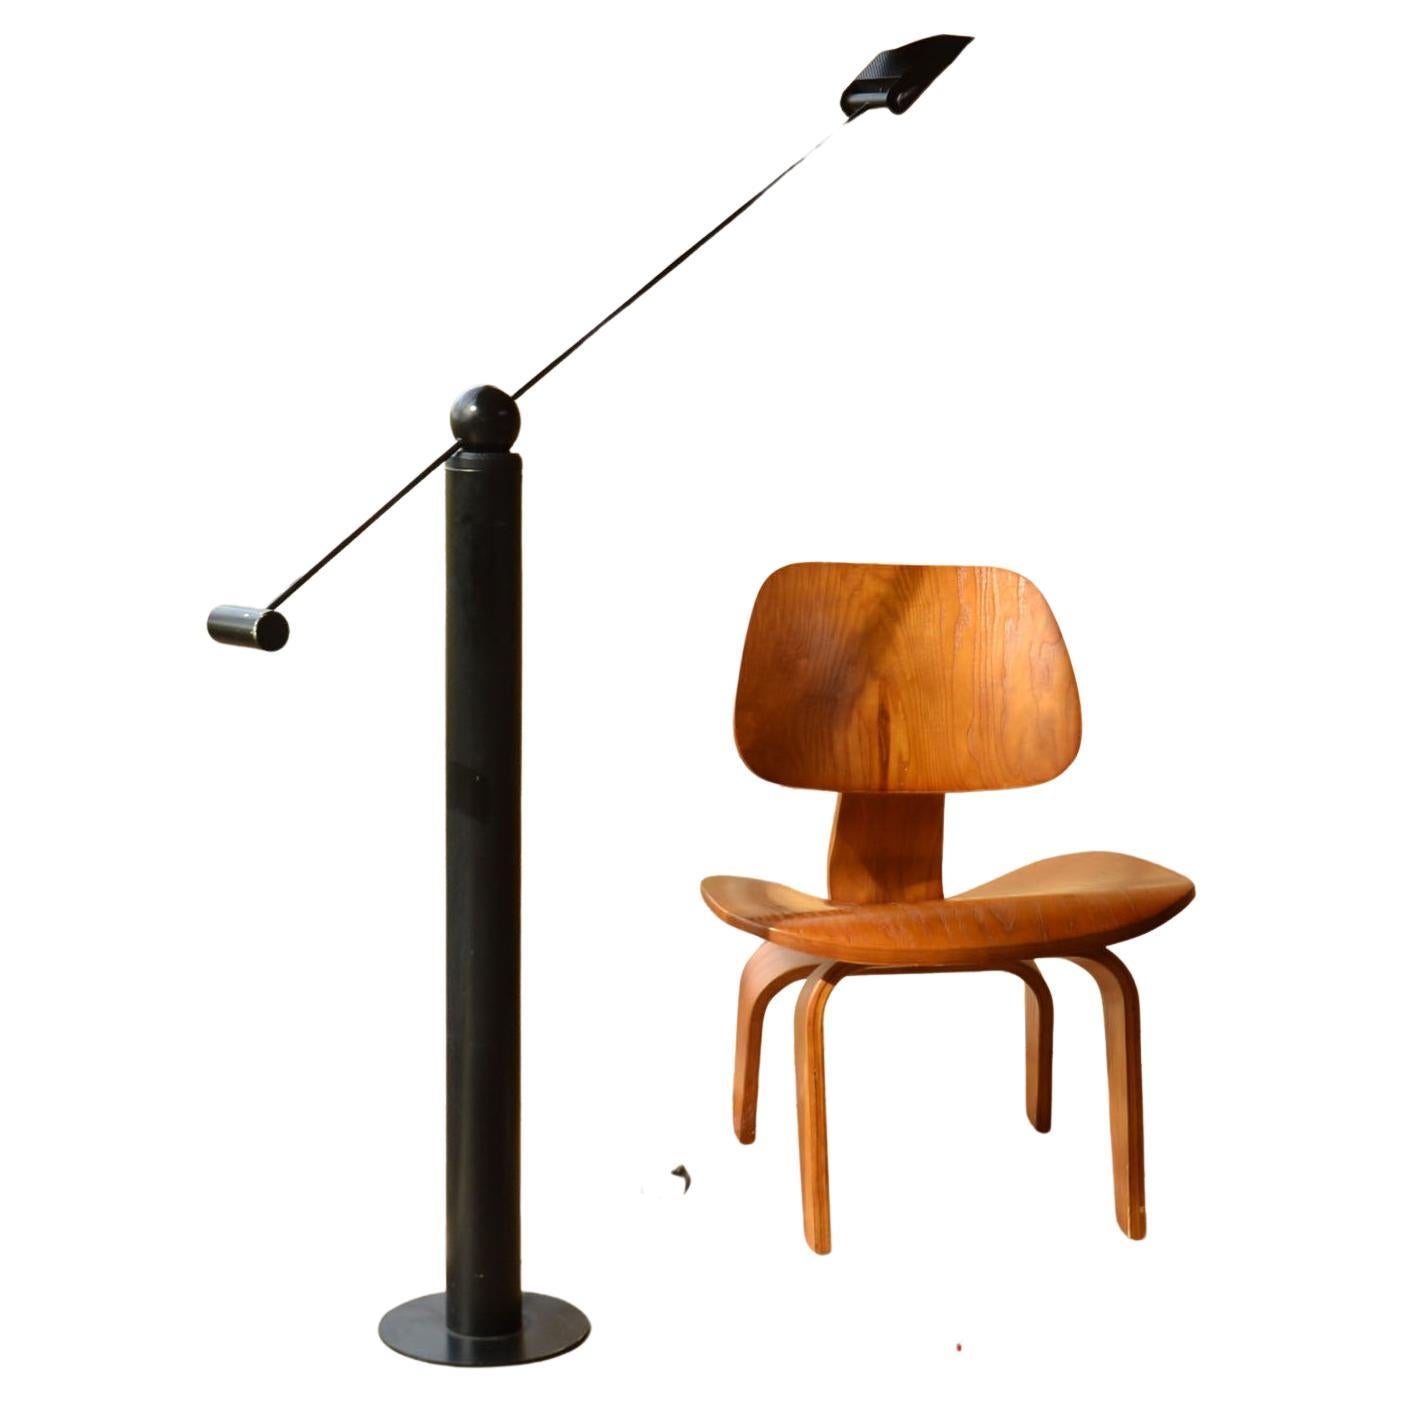 Minimal black metal floor lamp with adjustable arm counterbalancing on cylinder base and halogen light source attributed to Rico & Rosemarie Baltensweiler, Switzerland 1960-70's. The lamp balances on a ball weight resting on a pillar base that